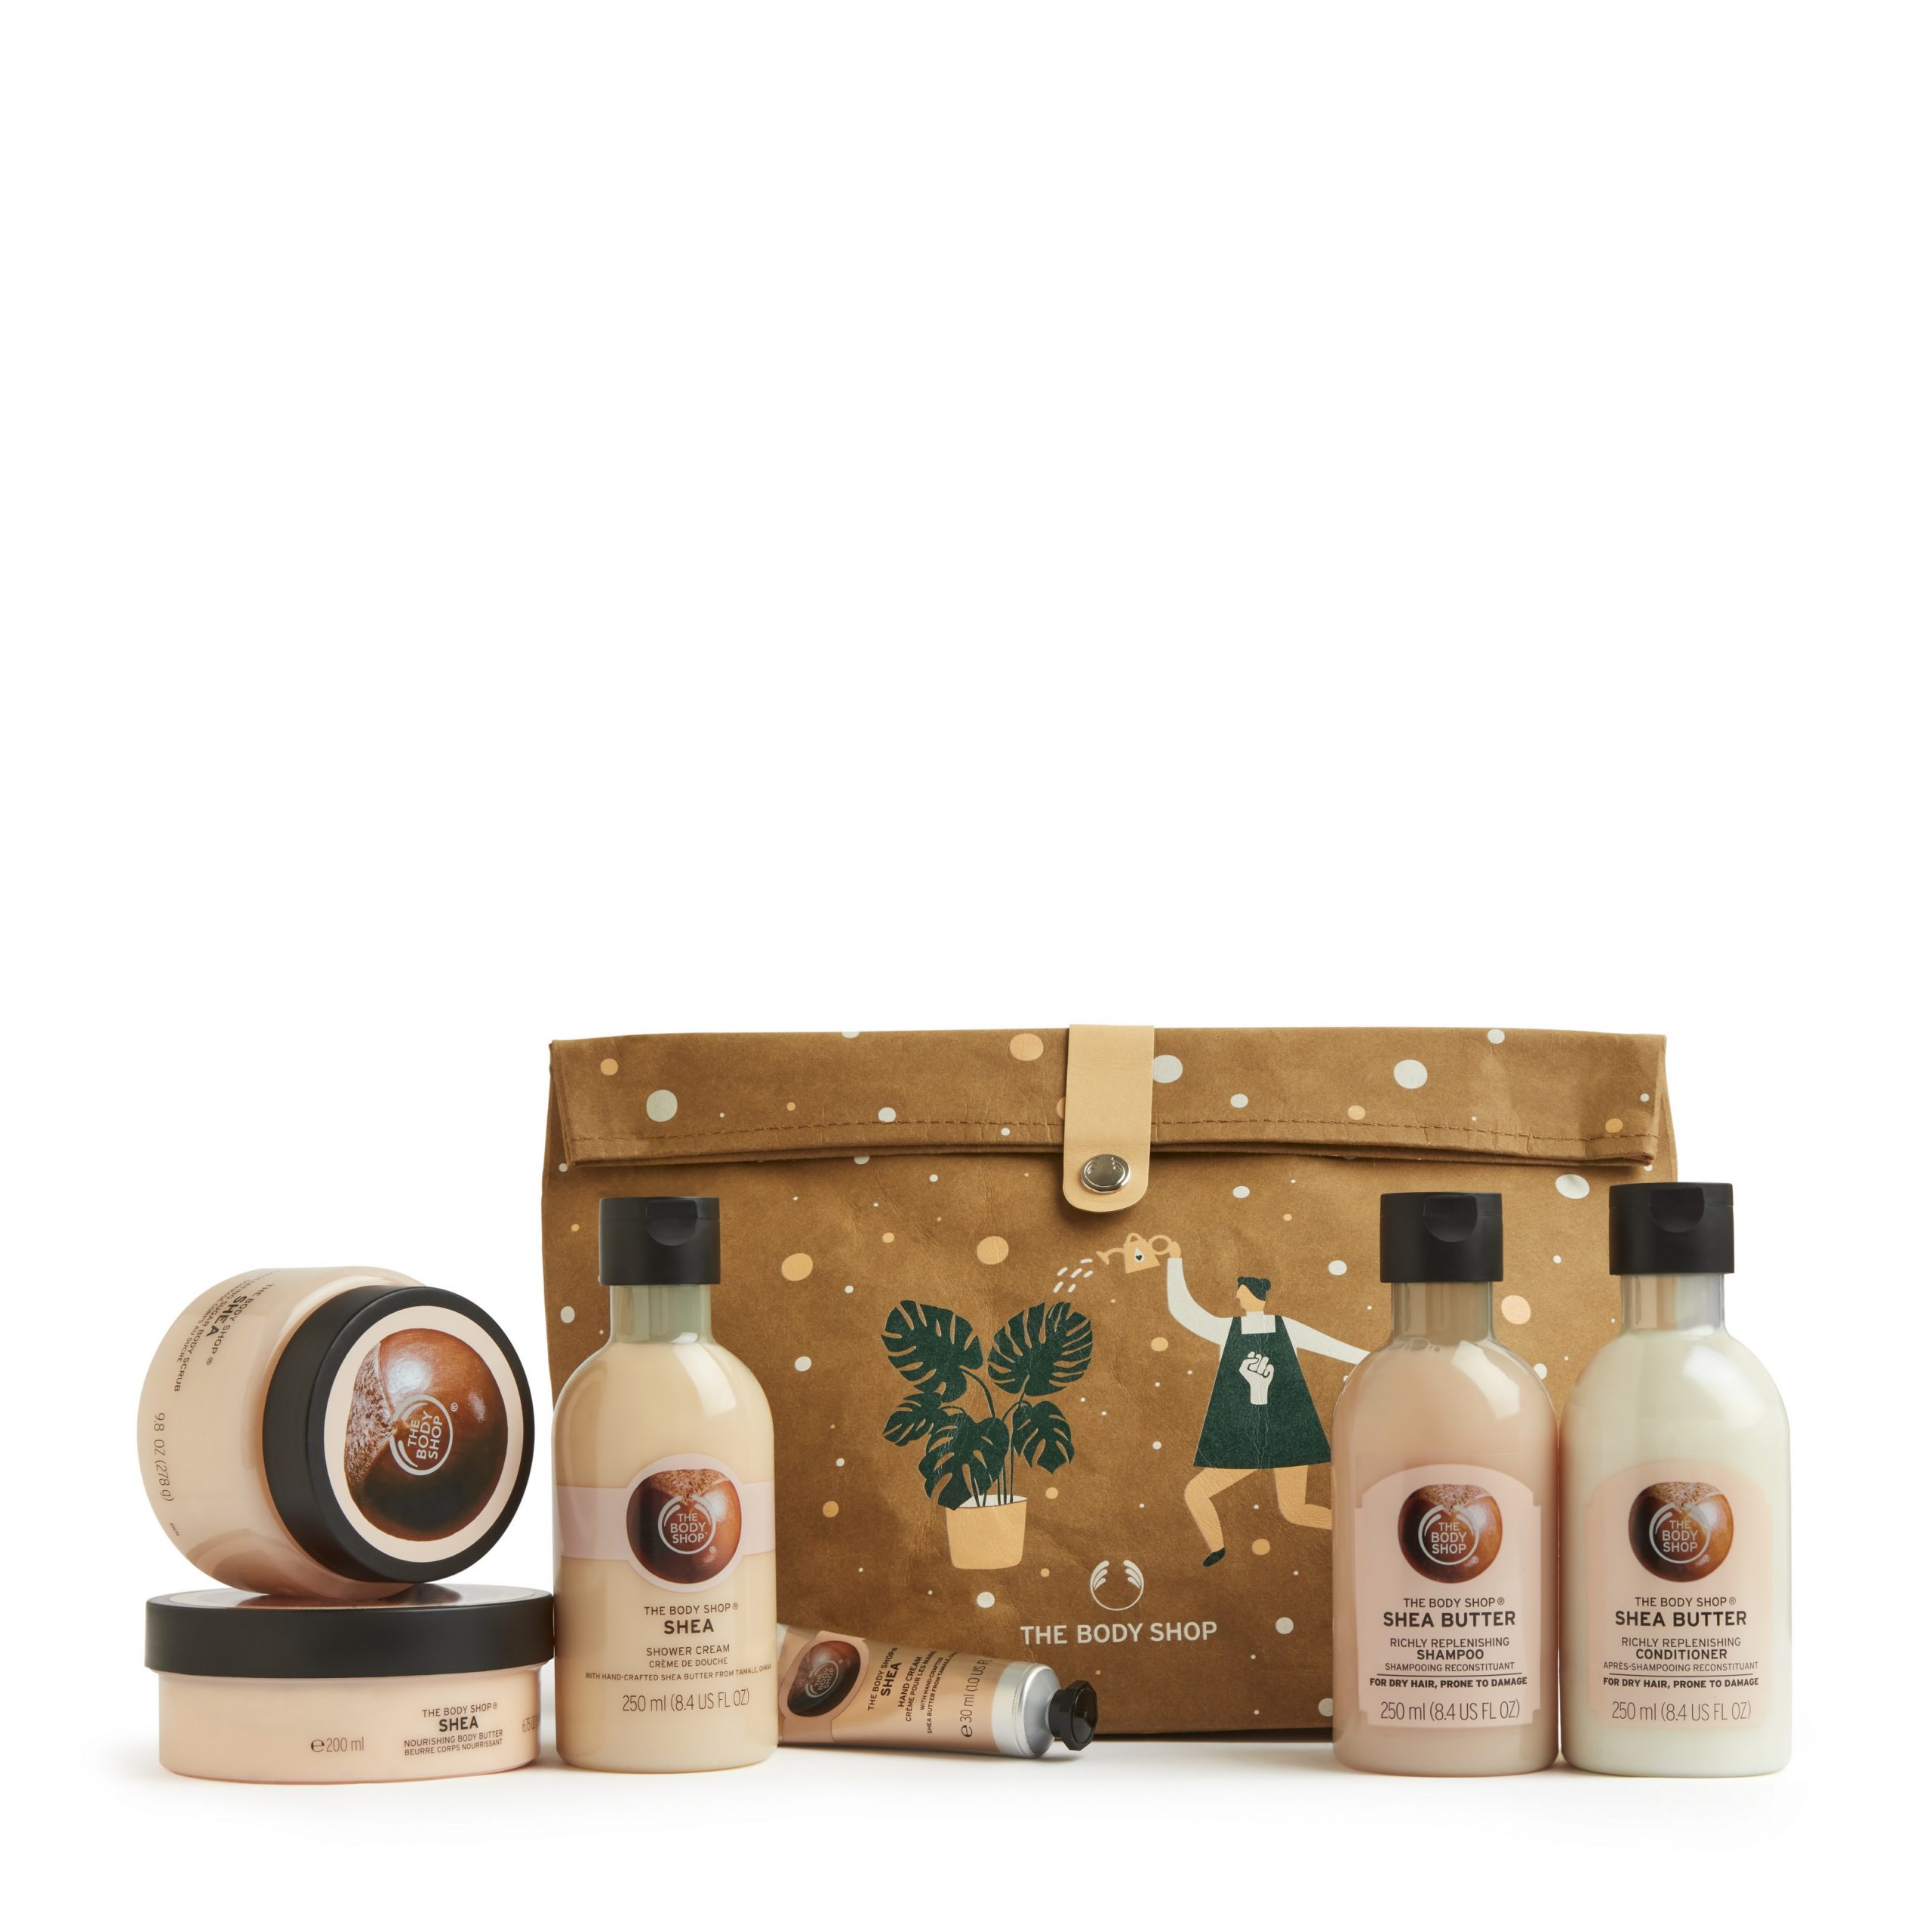 Celebrate together with The Body Shop